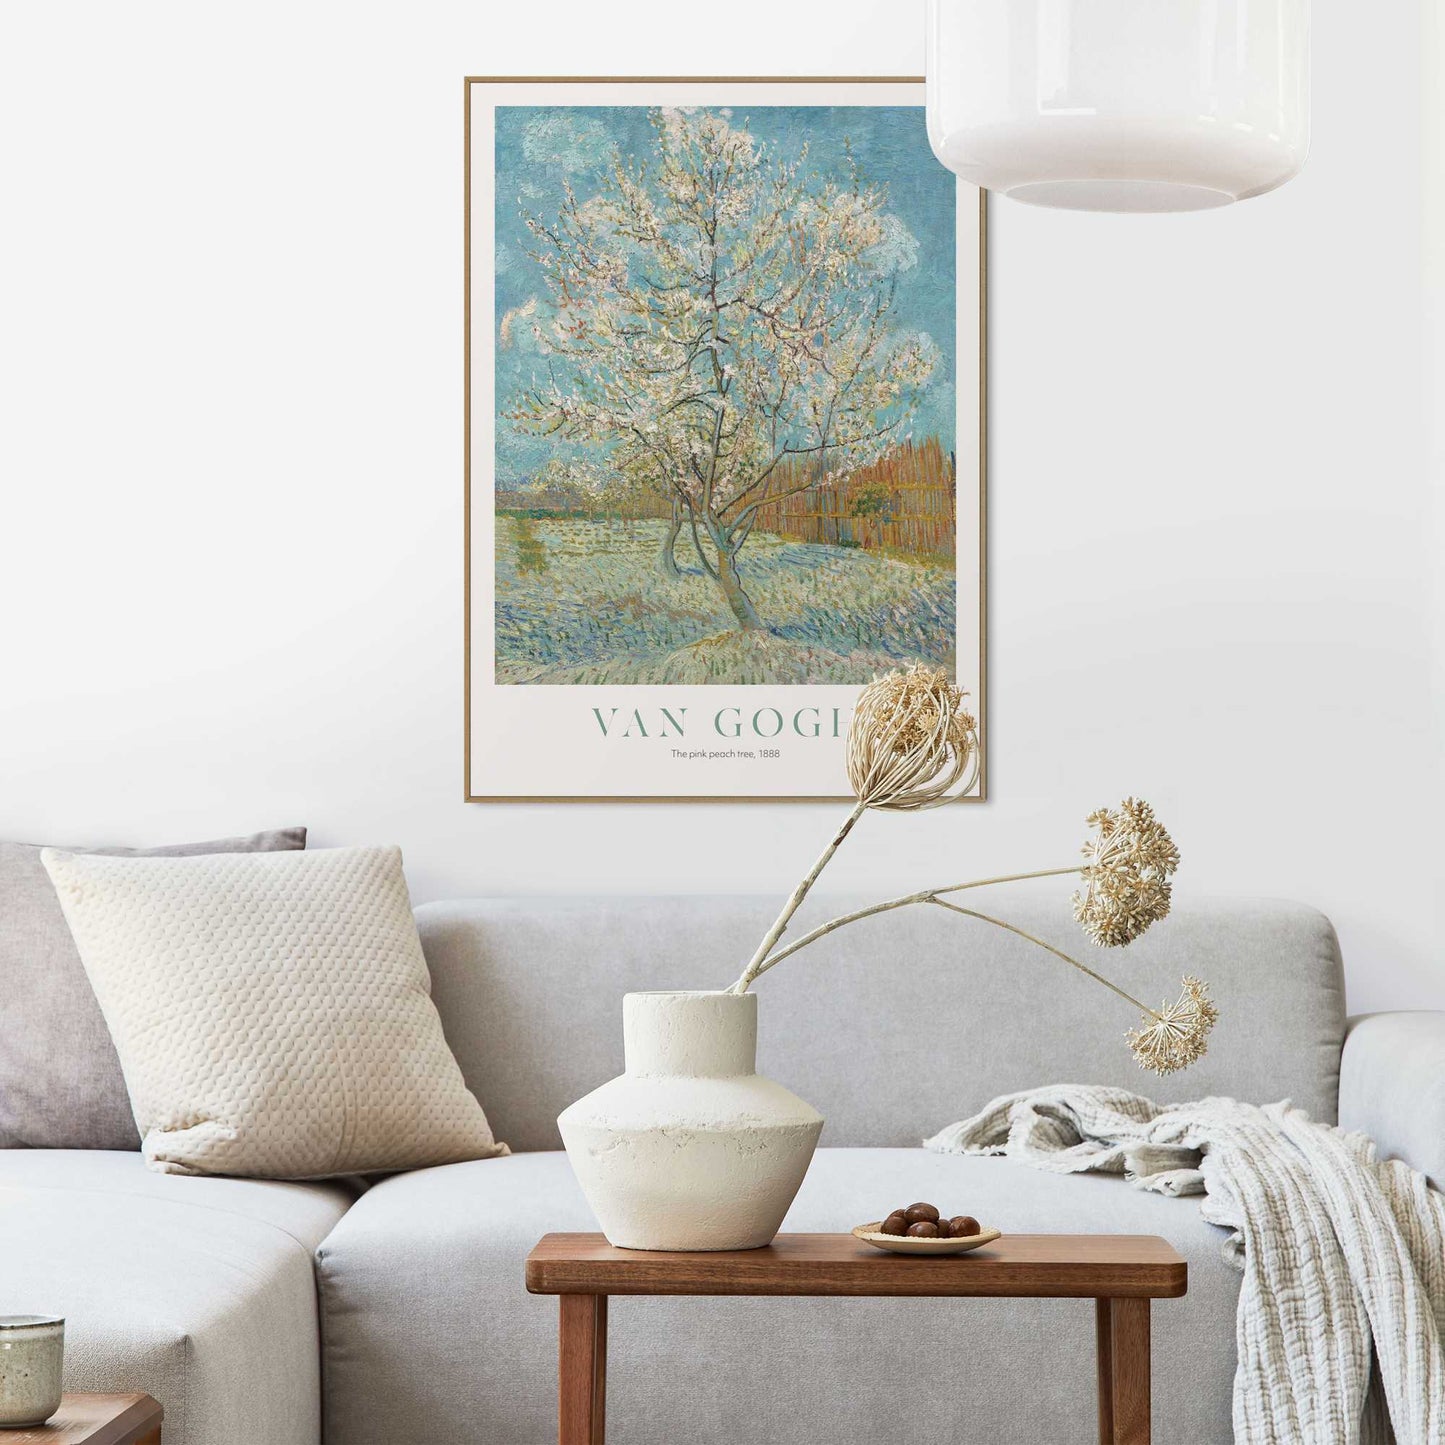 Framed in Wood Van Gogh - the pink peachtree 70x50